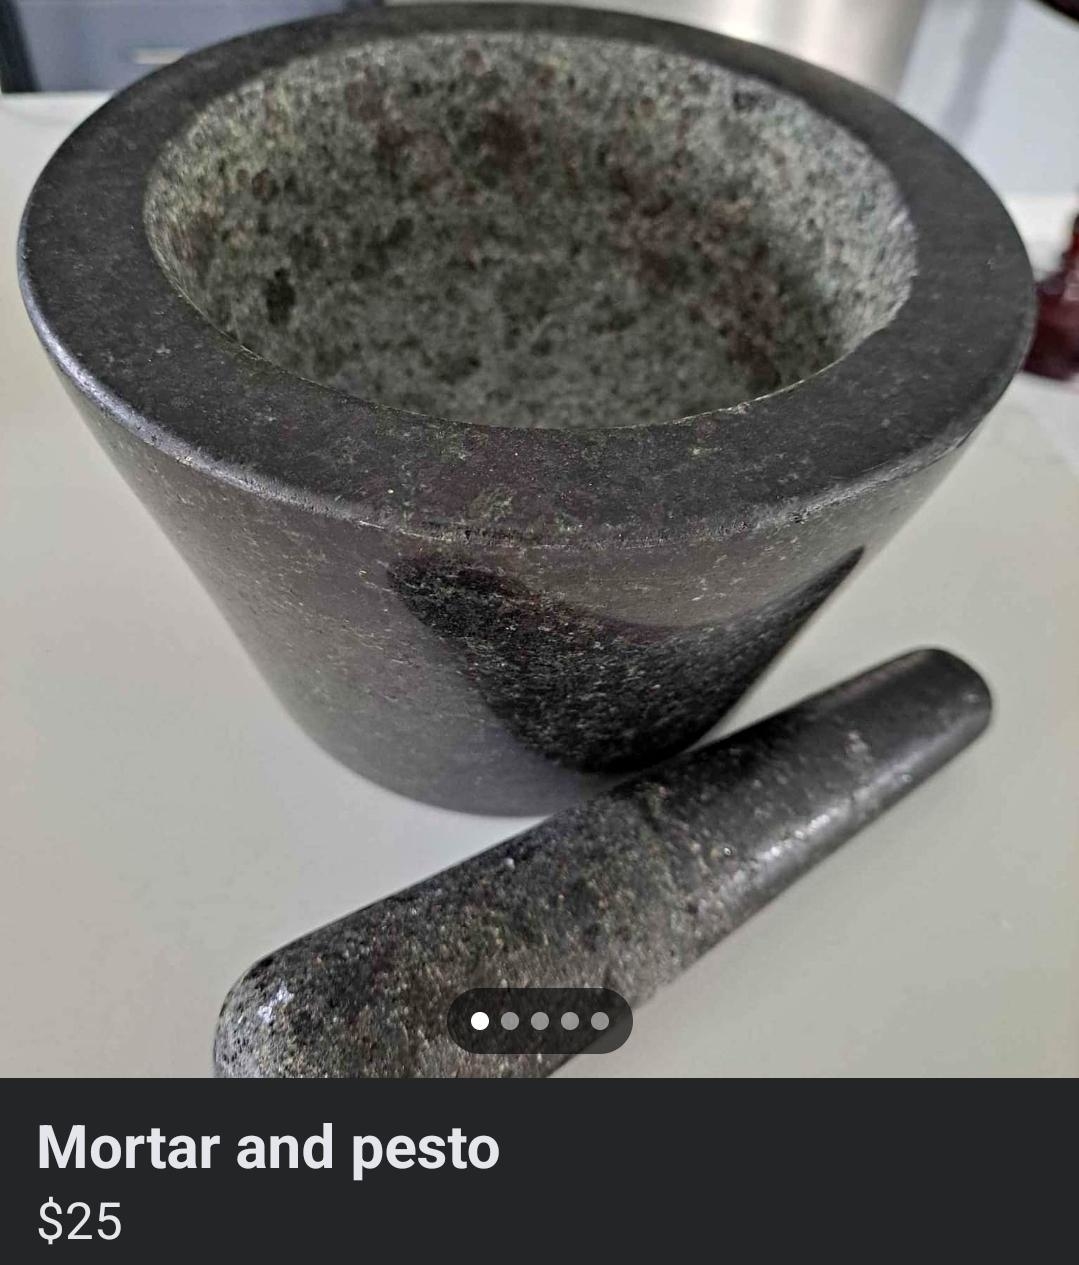 Mortar and pestle on a counter with price label, titled &quot;Mortar and pesto&quot; for $25